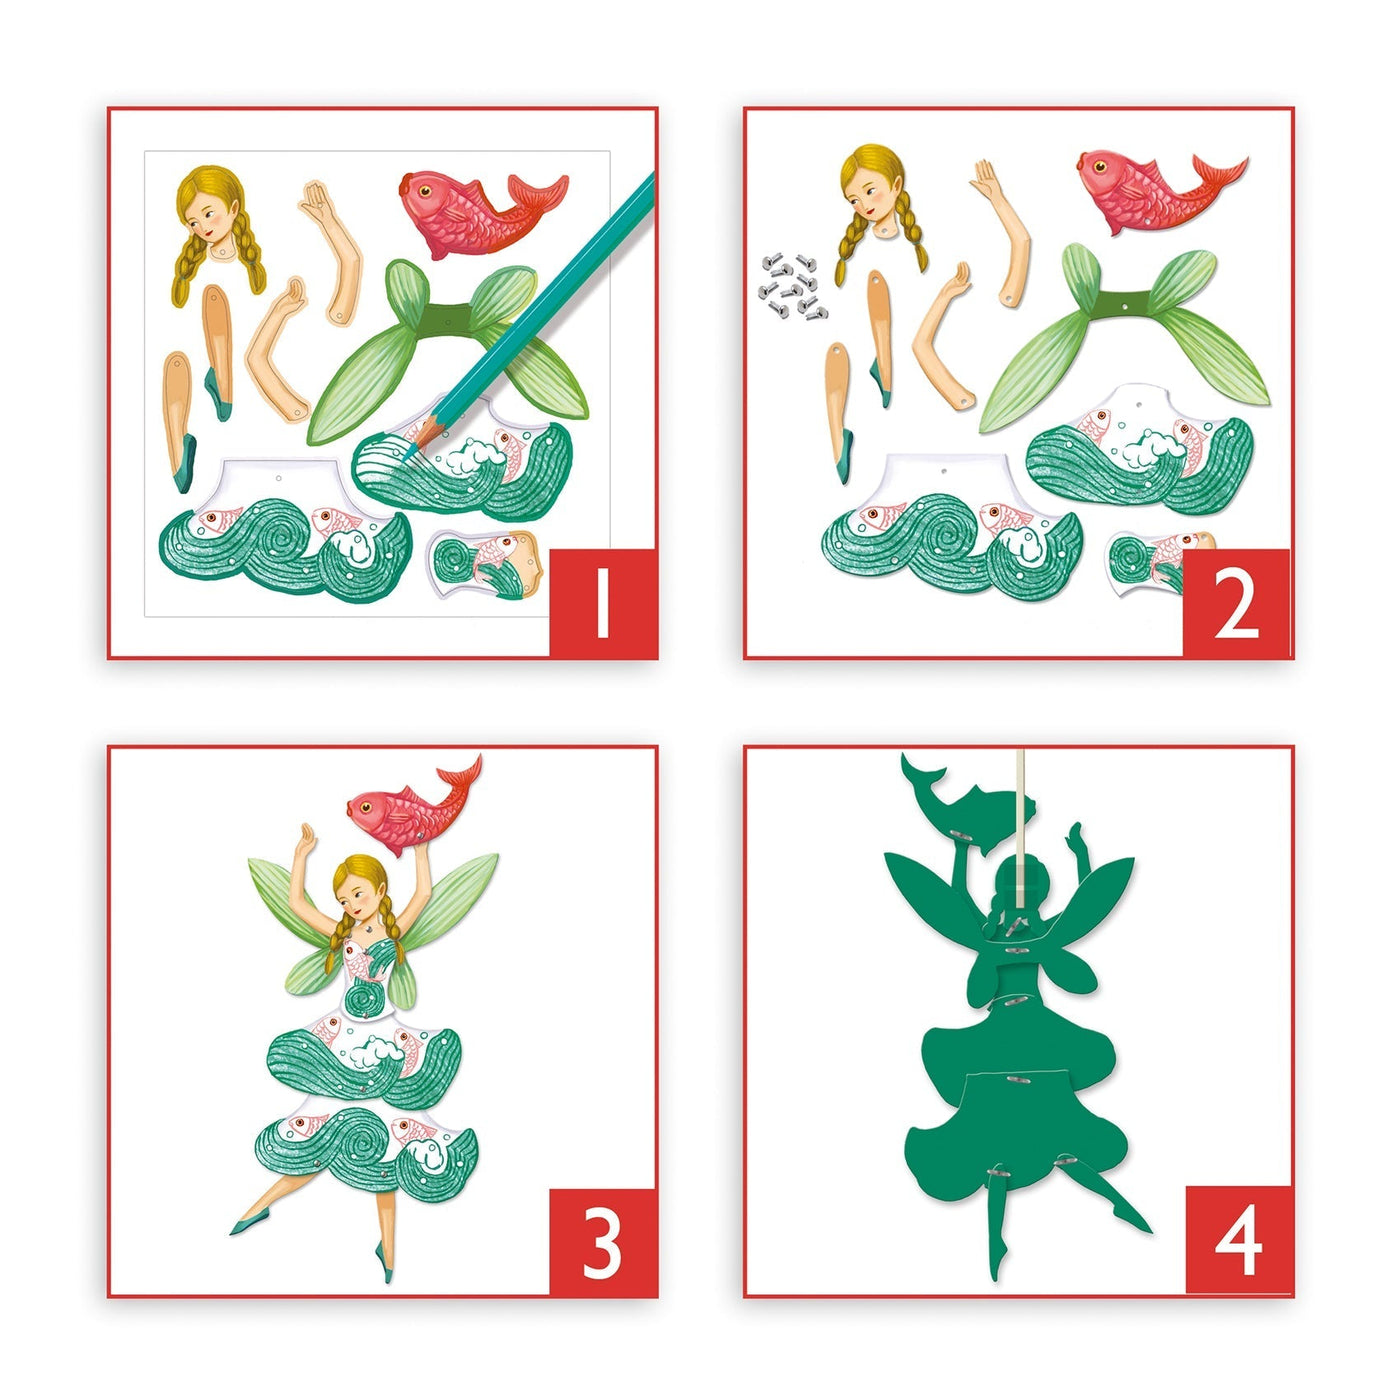 Jumping Jacks - Fairies * - Small Gifts For Older Ones - Colouring Surprises